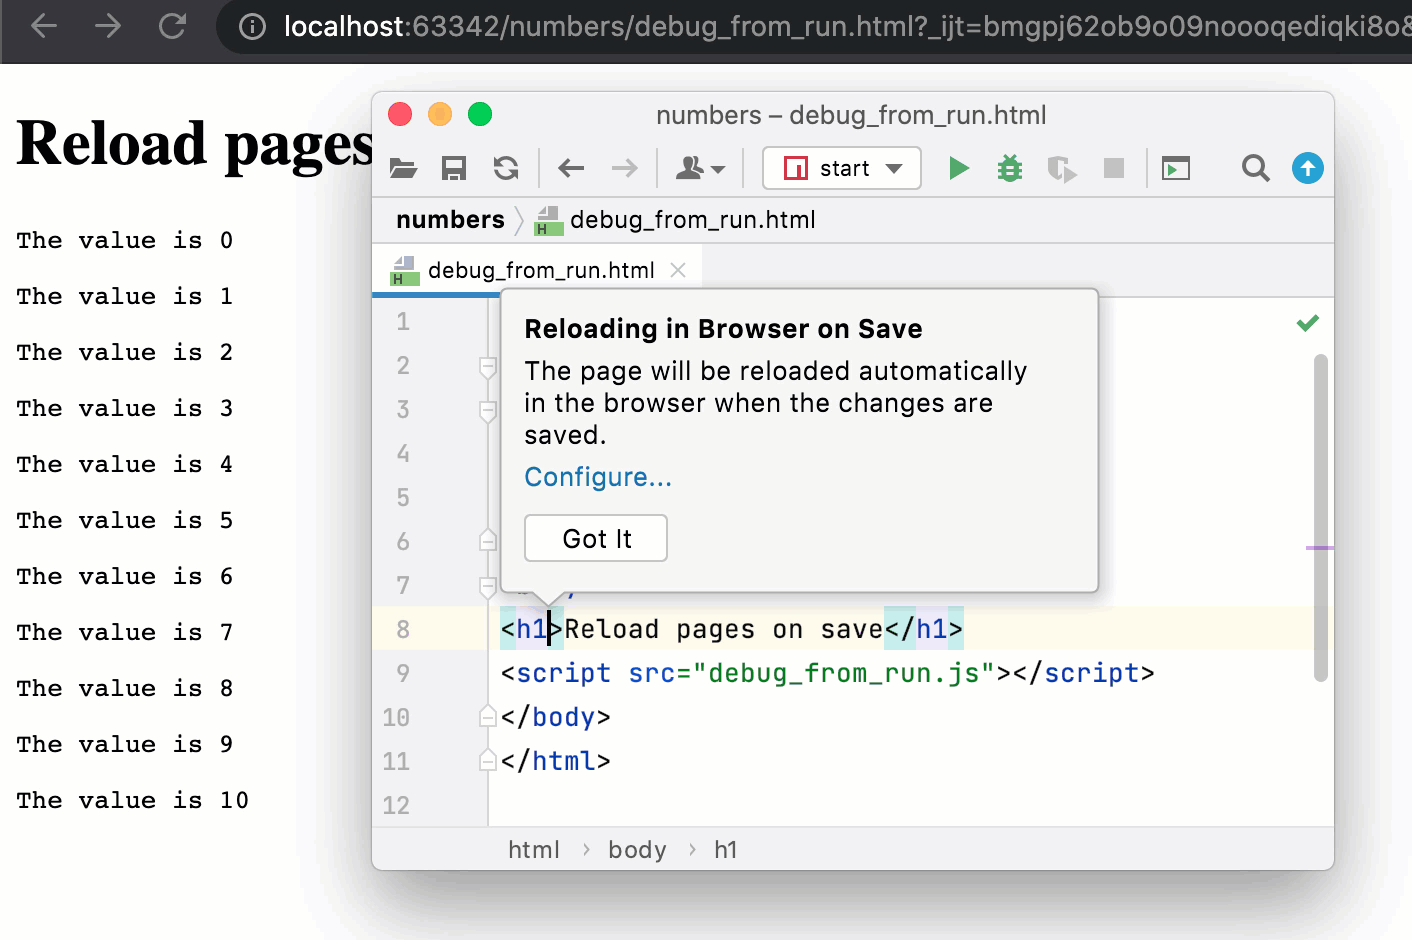 Reloading a HTML page on save